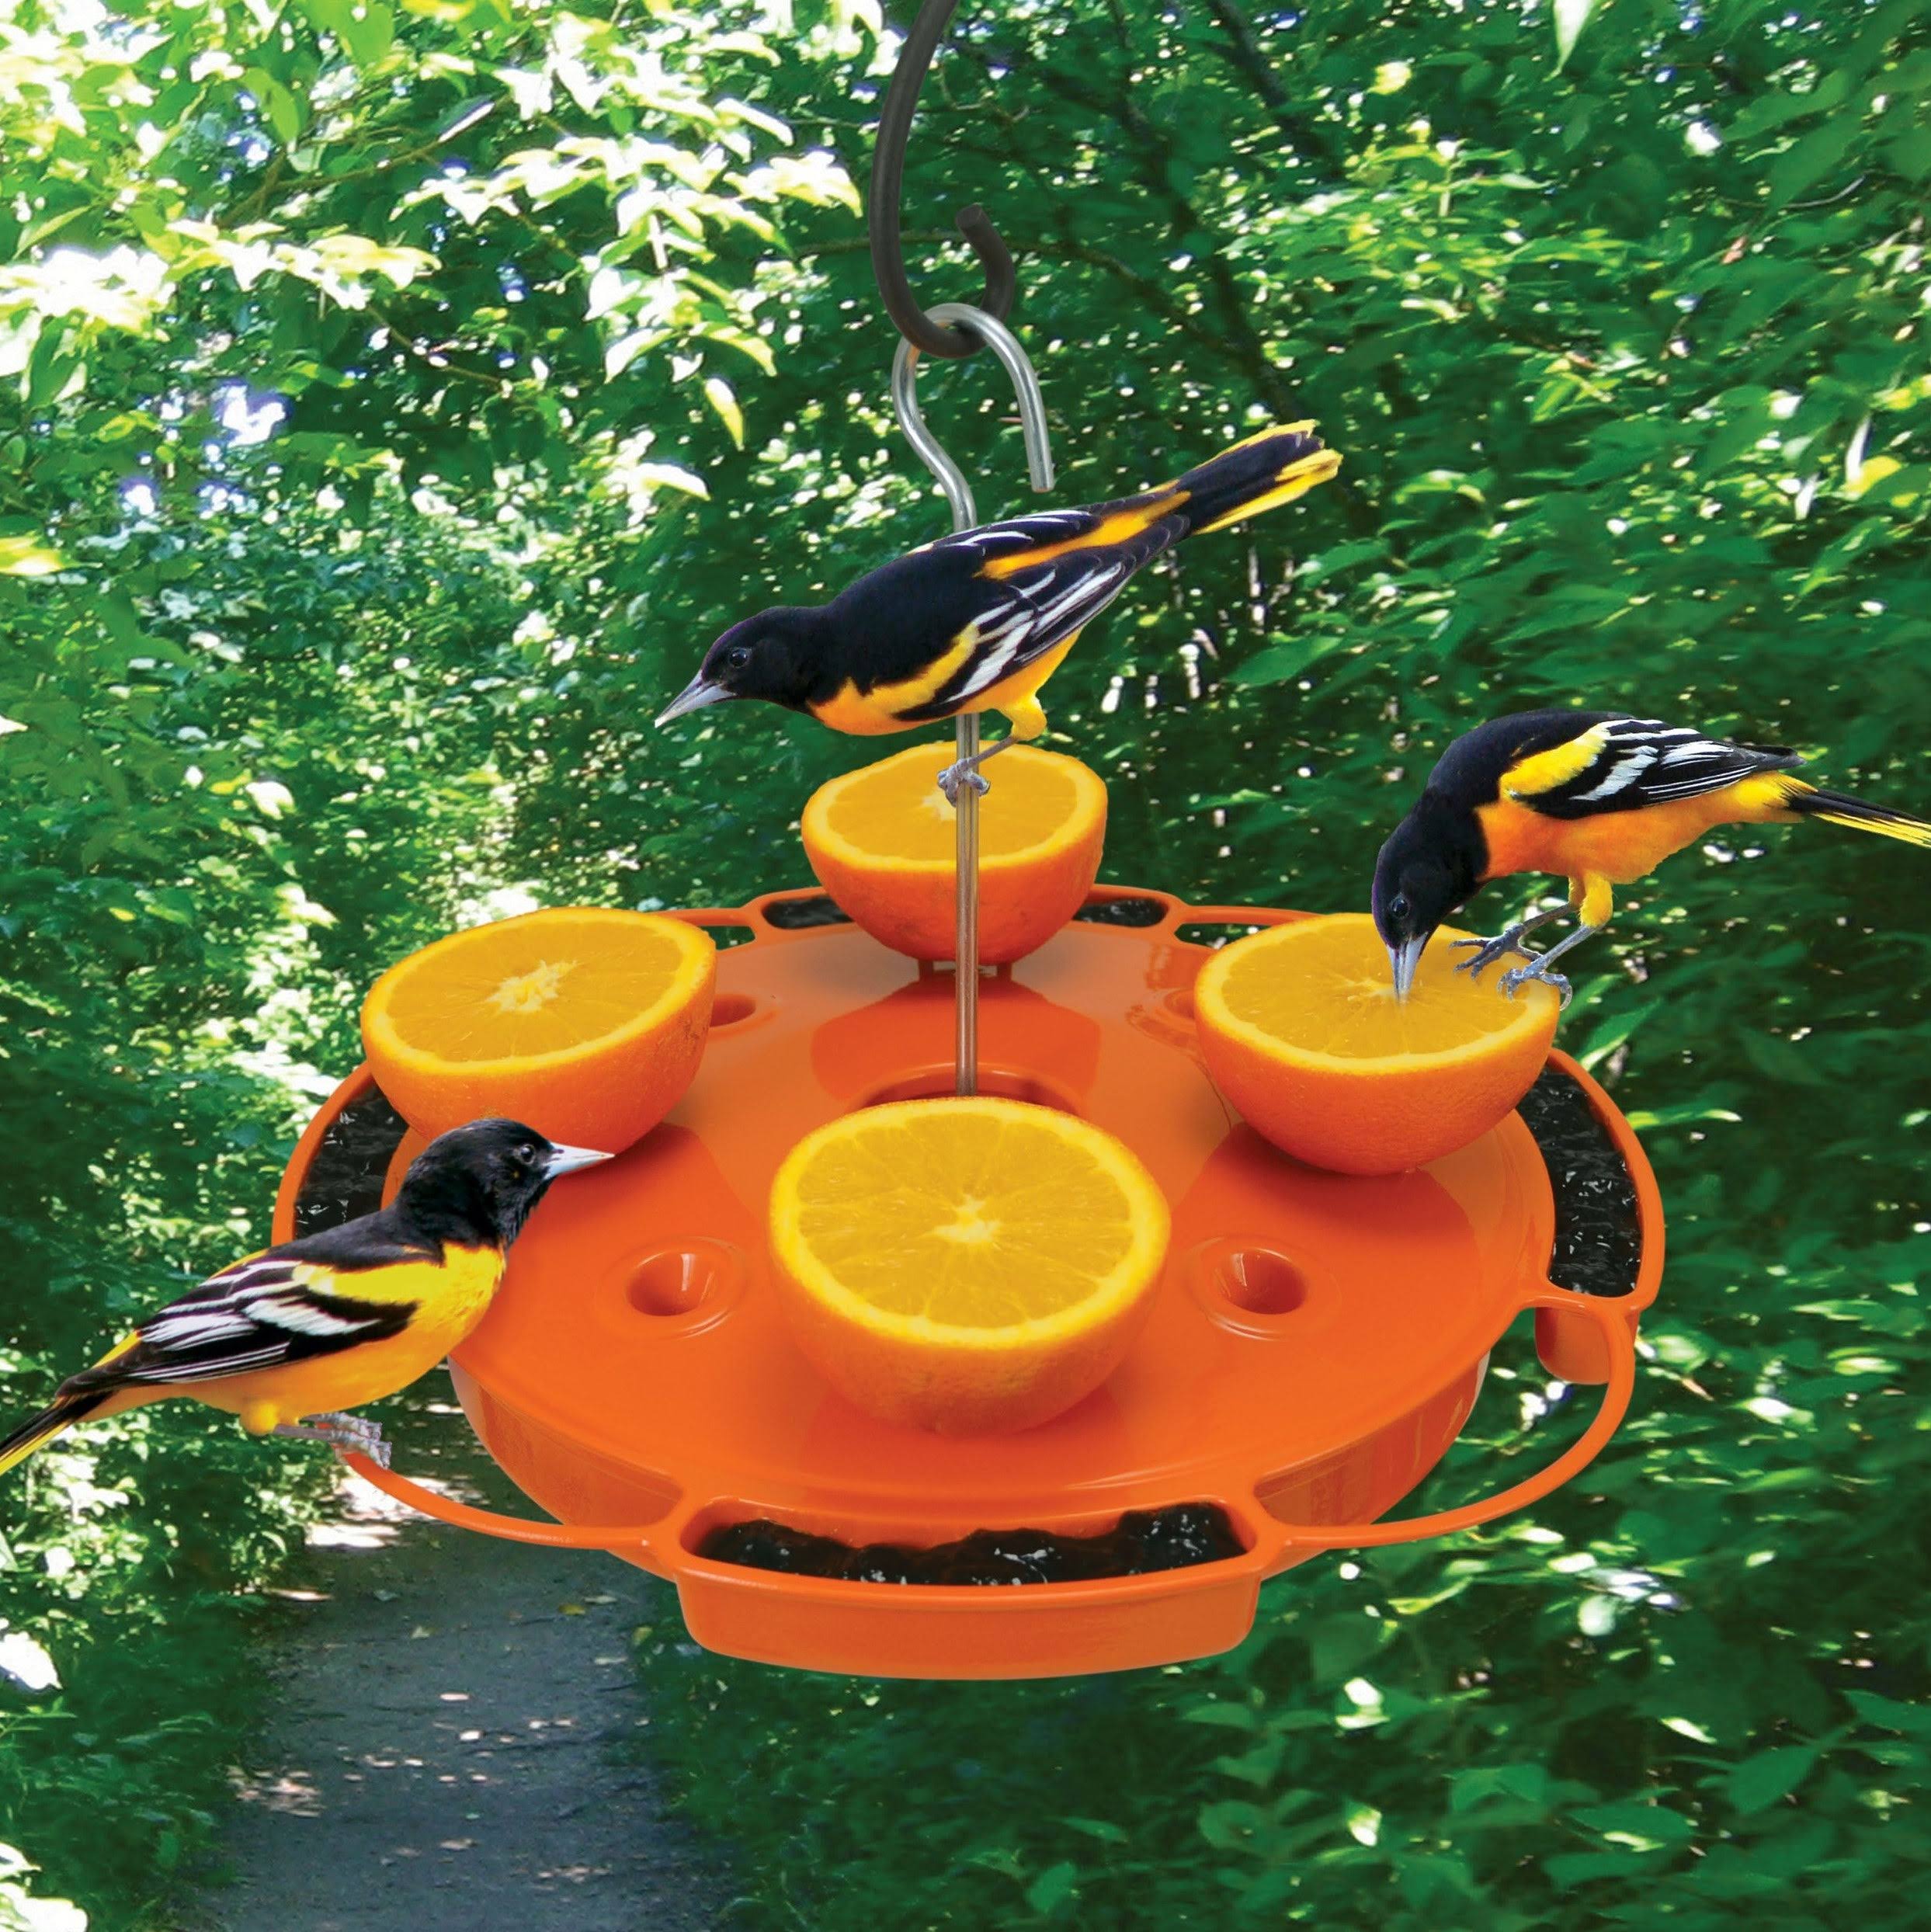 Songbird Essentials Fruit and Jelly Oriole Feeder